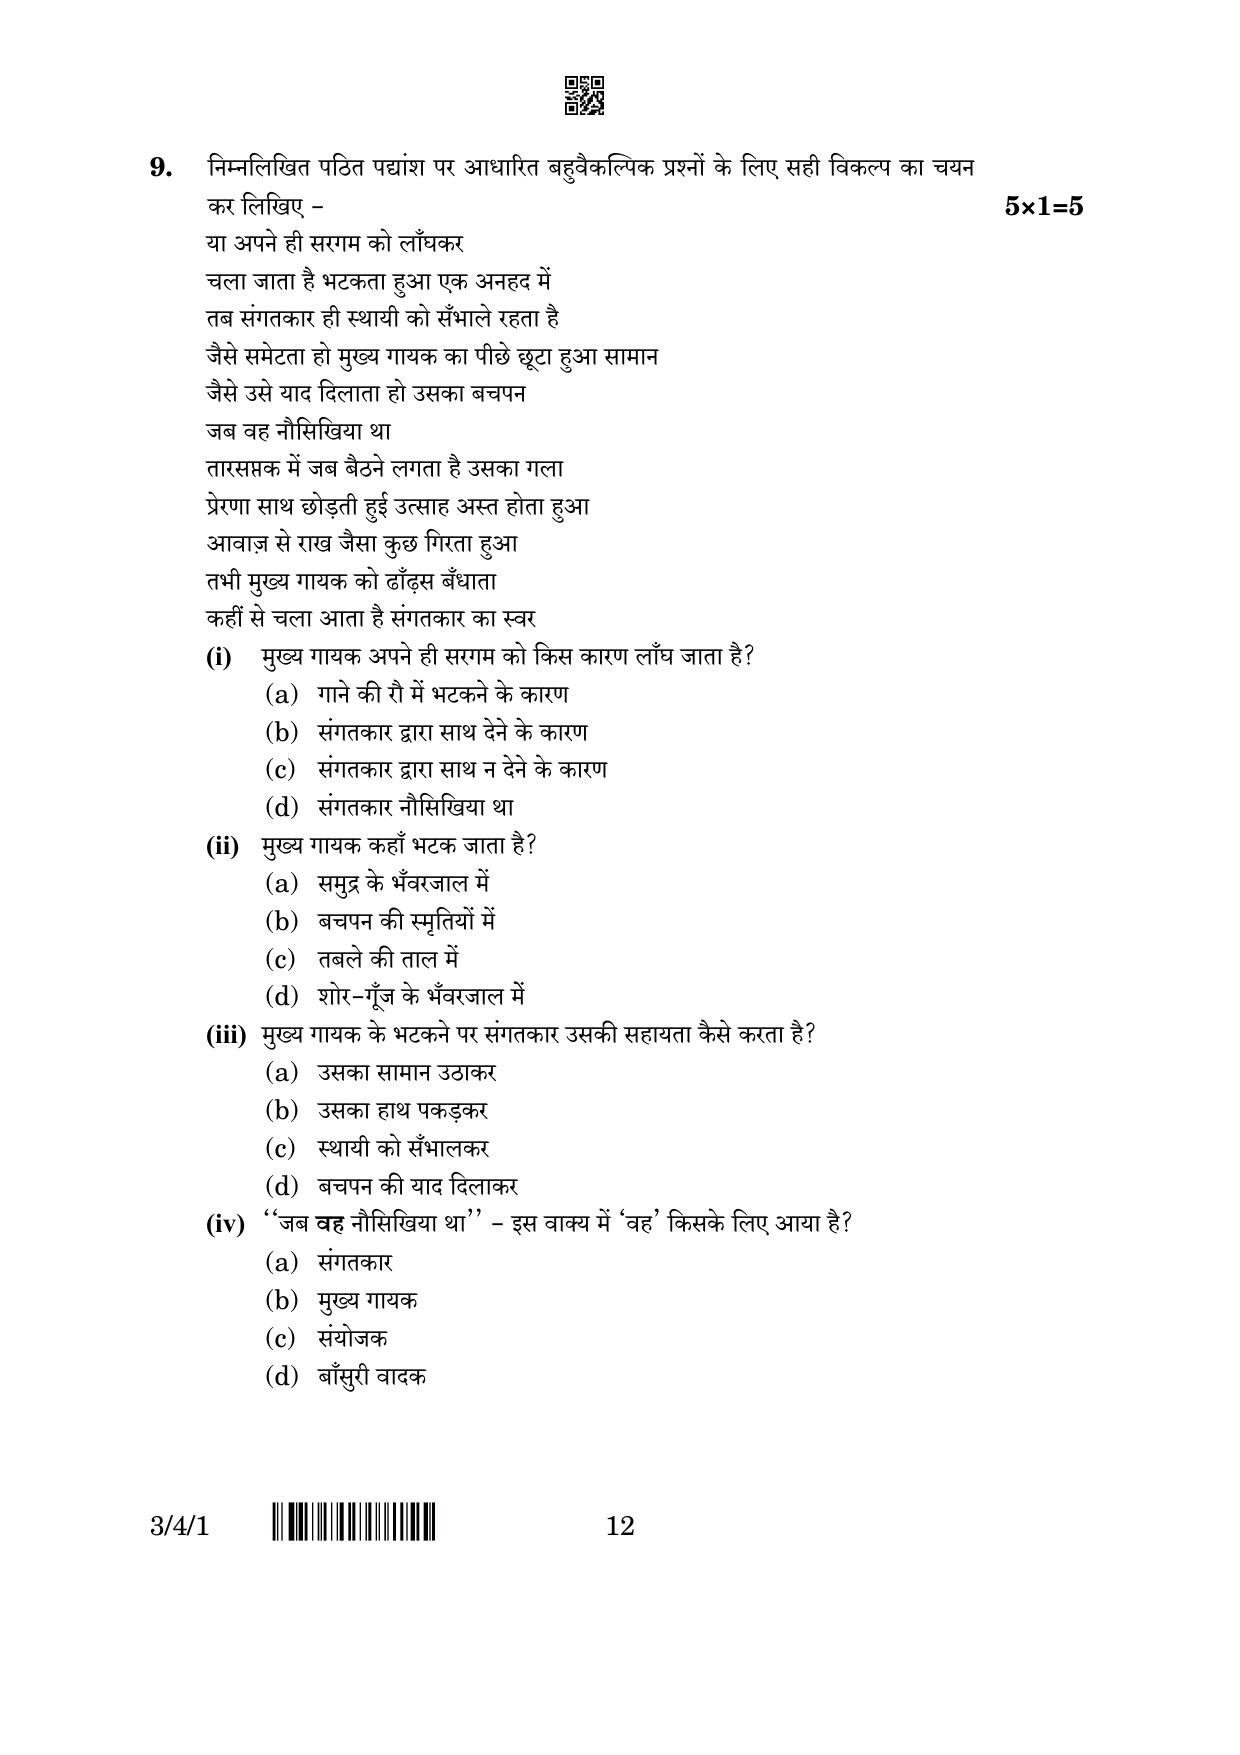 CBSE Class 10 3-4-1 Hindi A 2023 Question Paper - Page 12